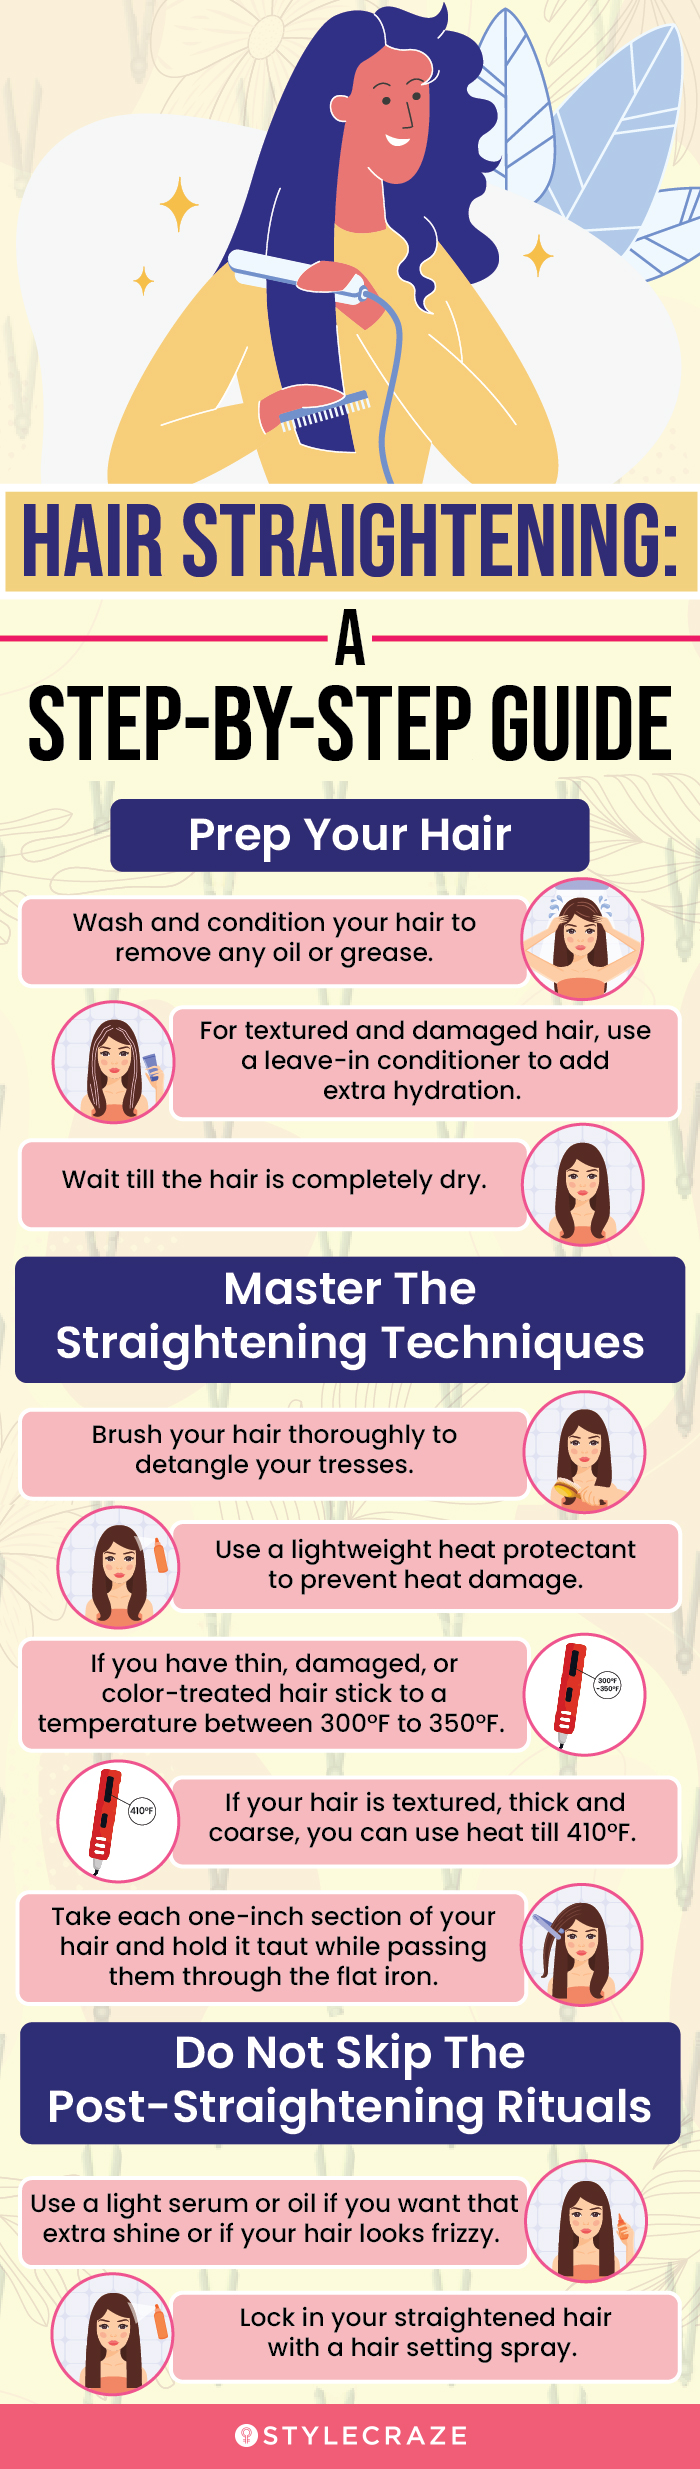 Hair Straightening: A Step-By-Step Guide (infographic)